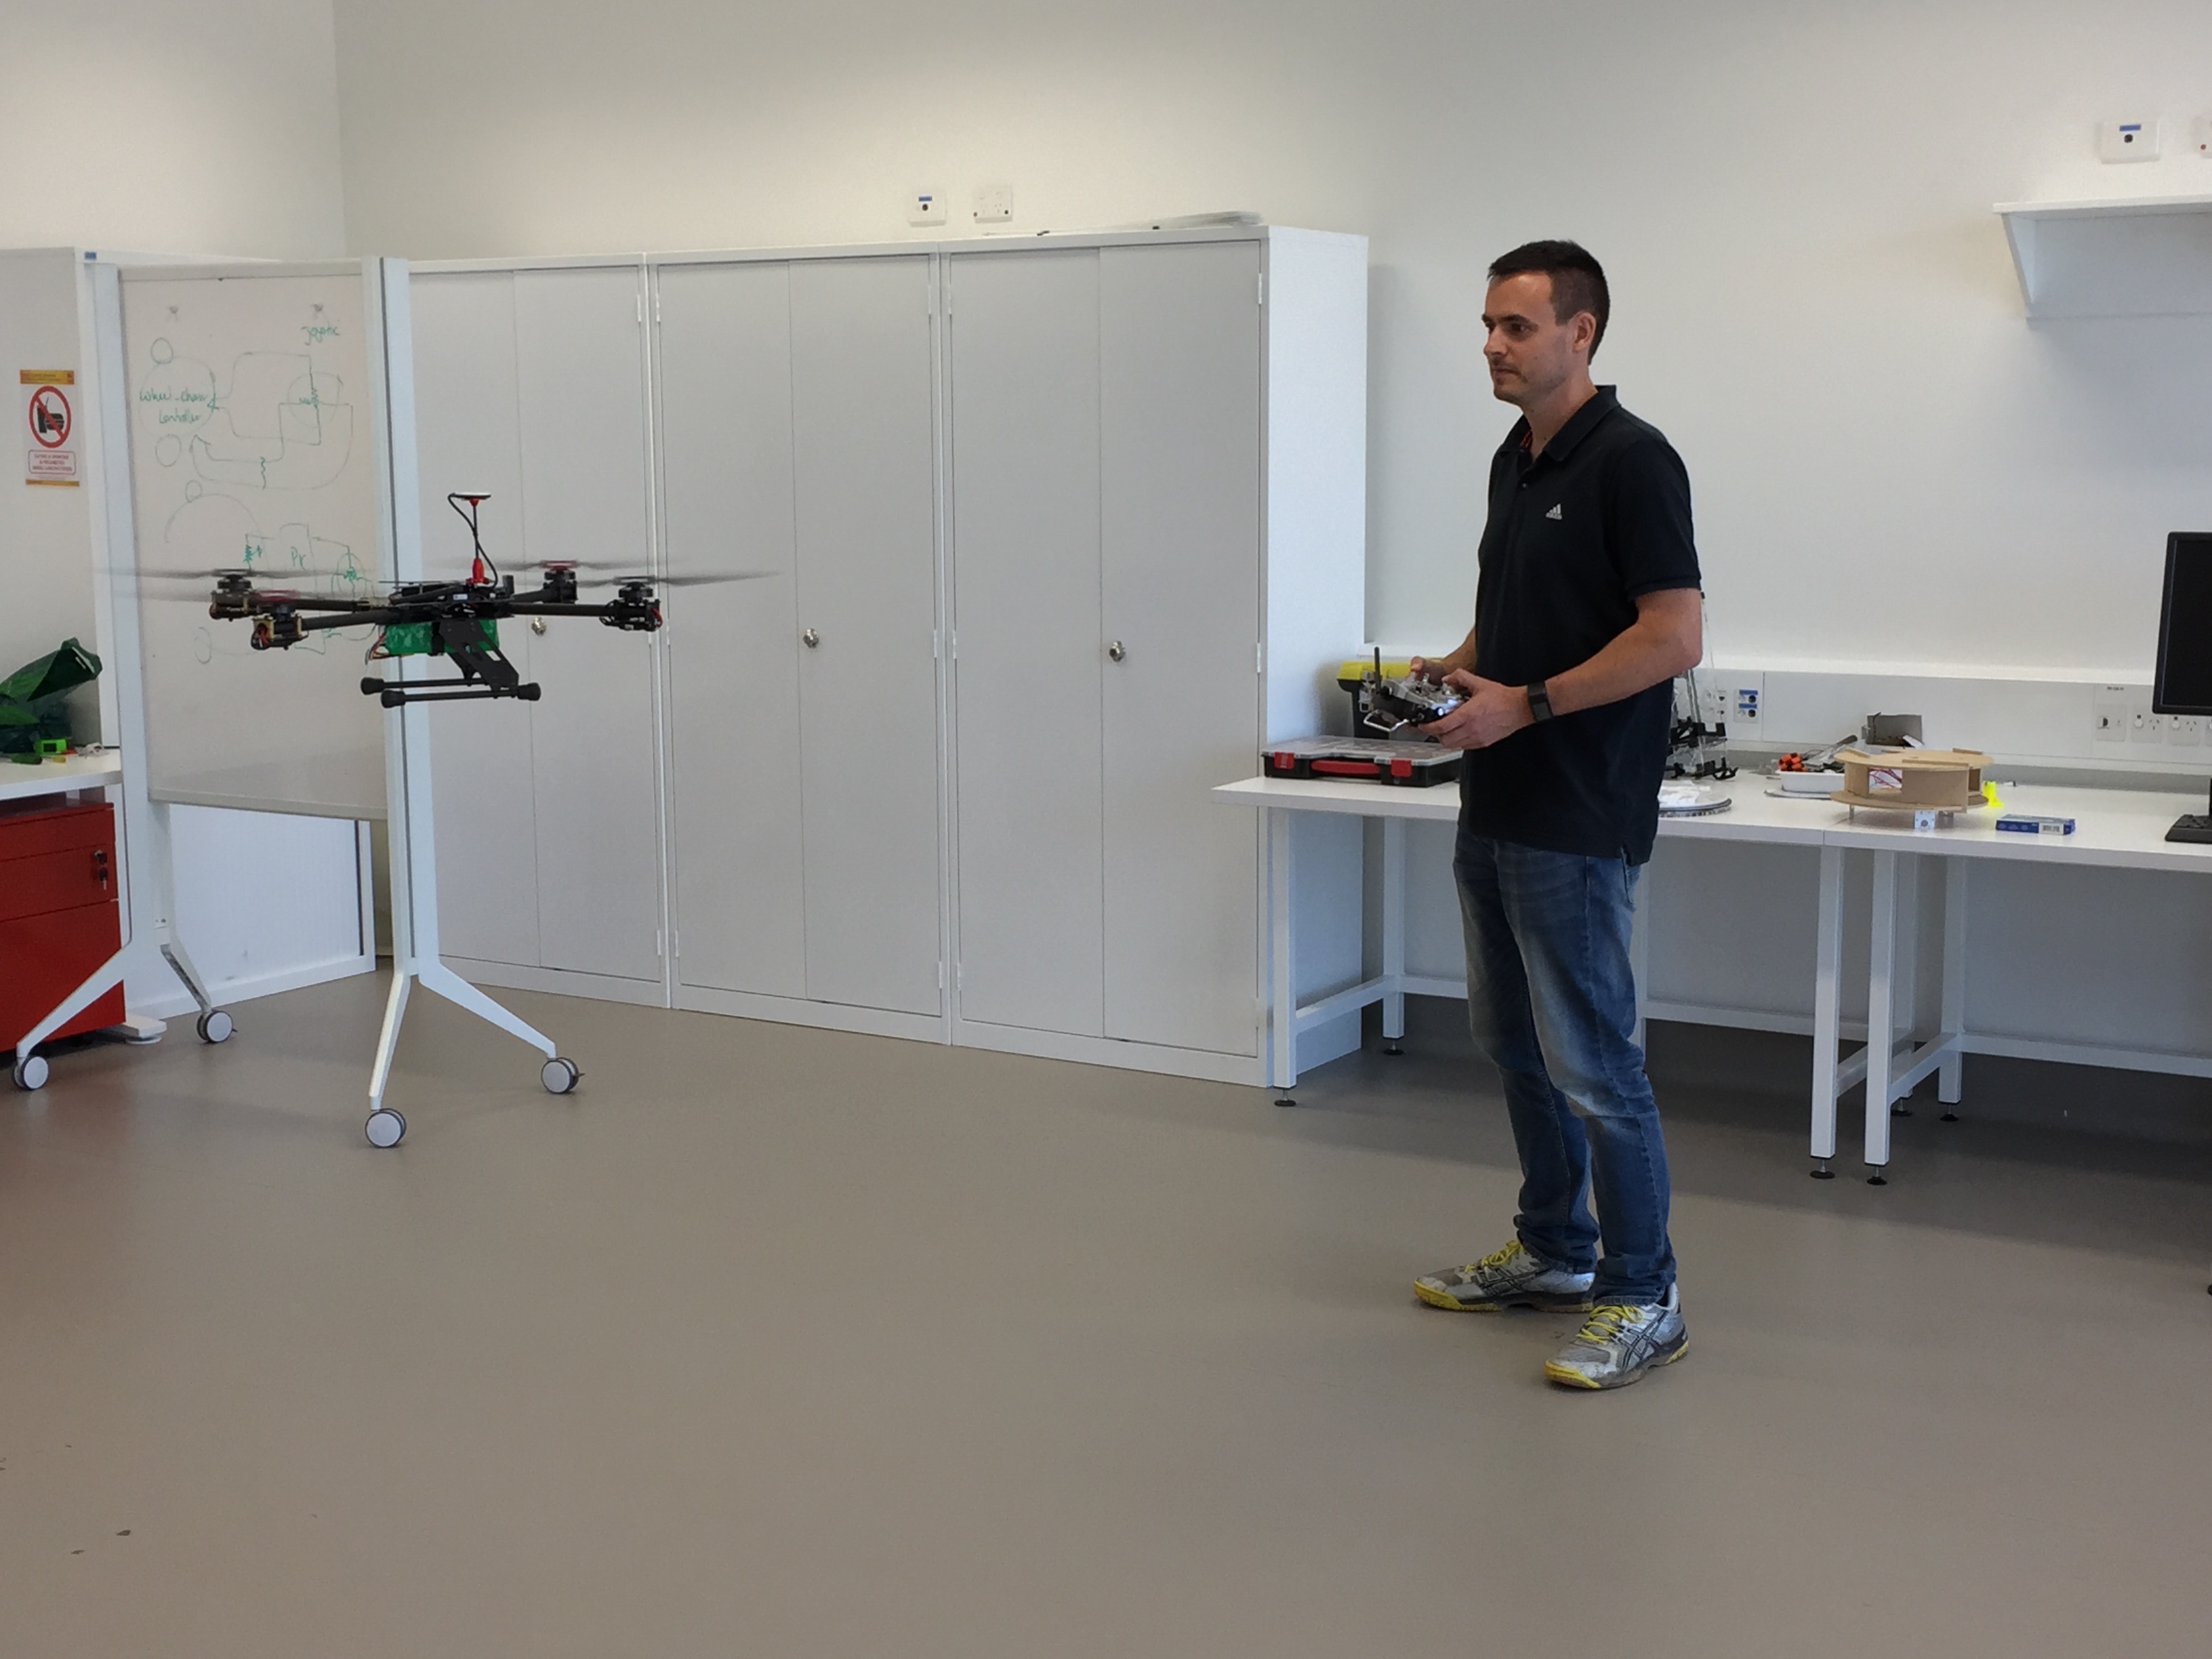 Test-flying a drone in the Flinders University Robotics Lab